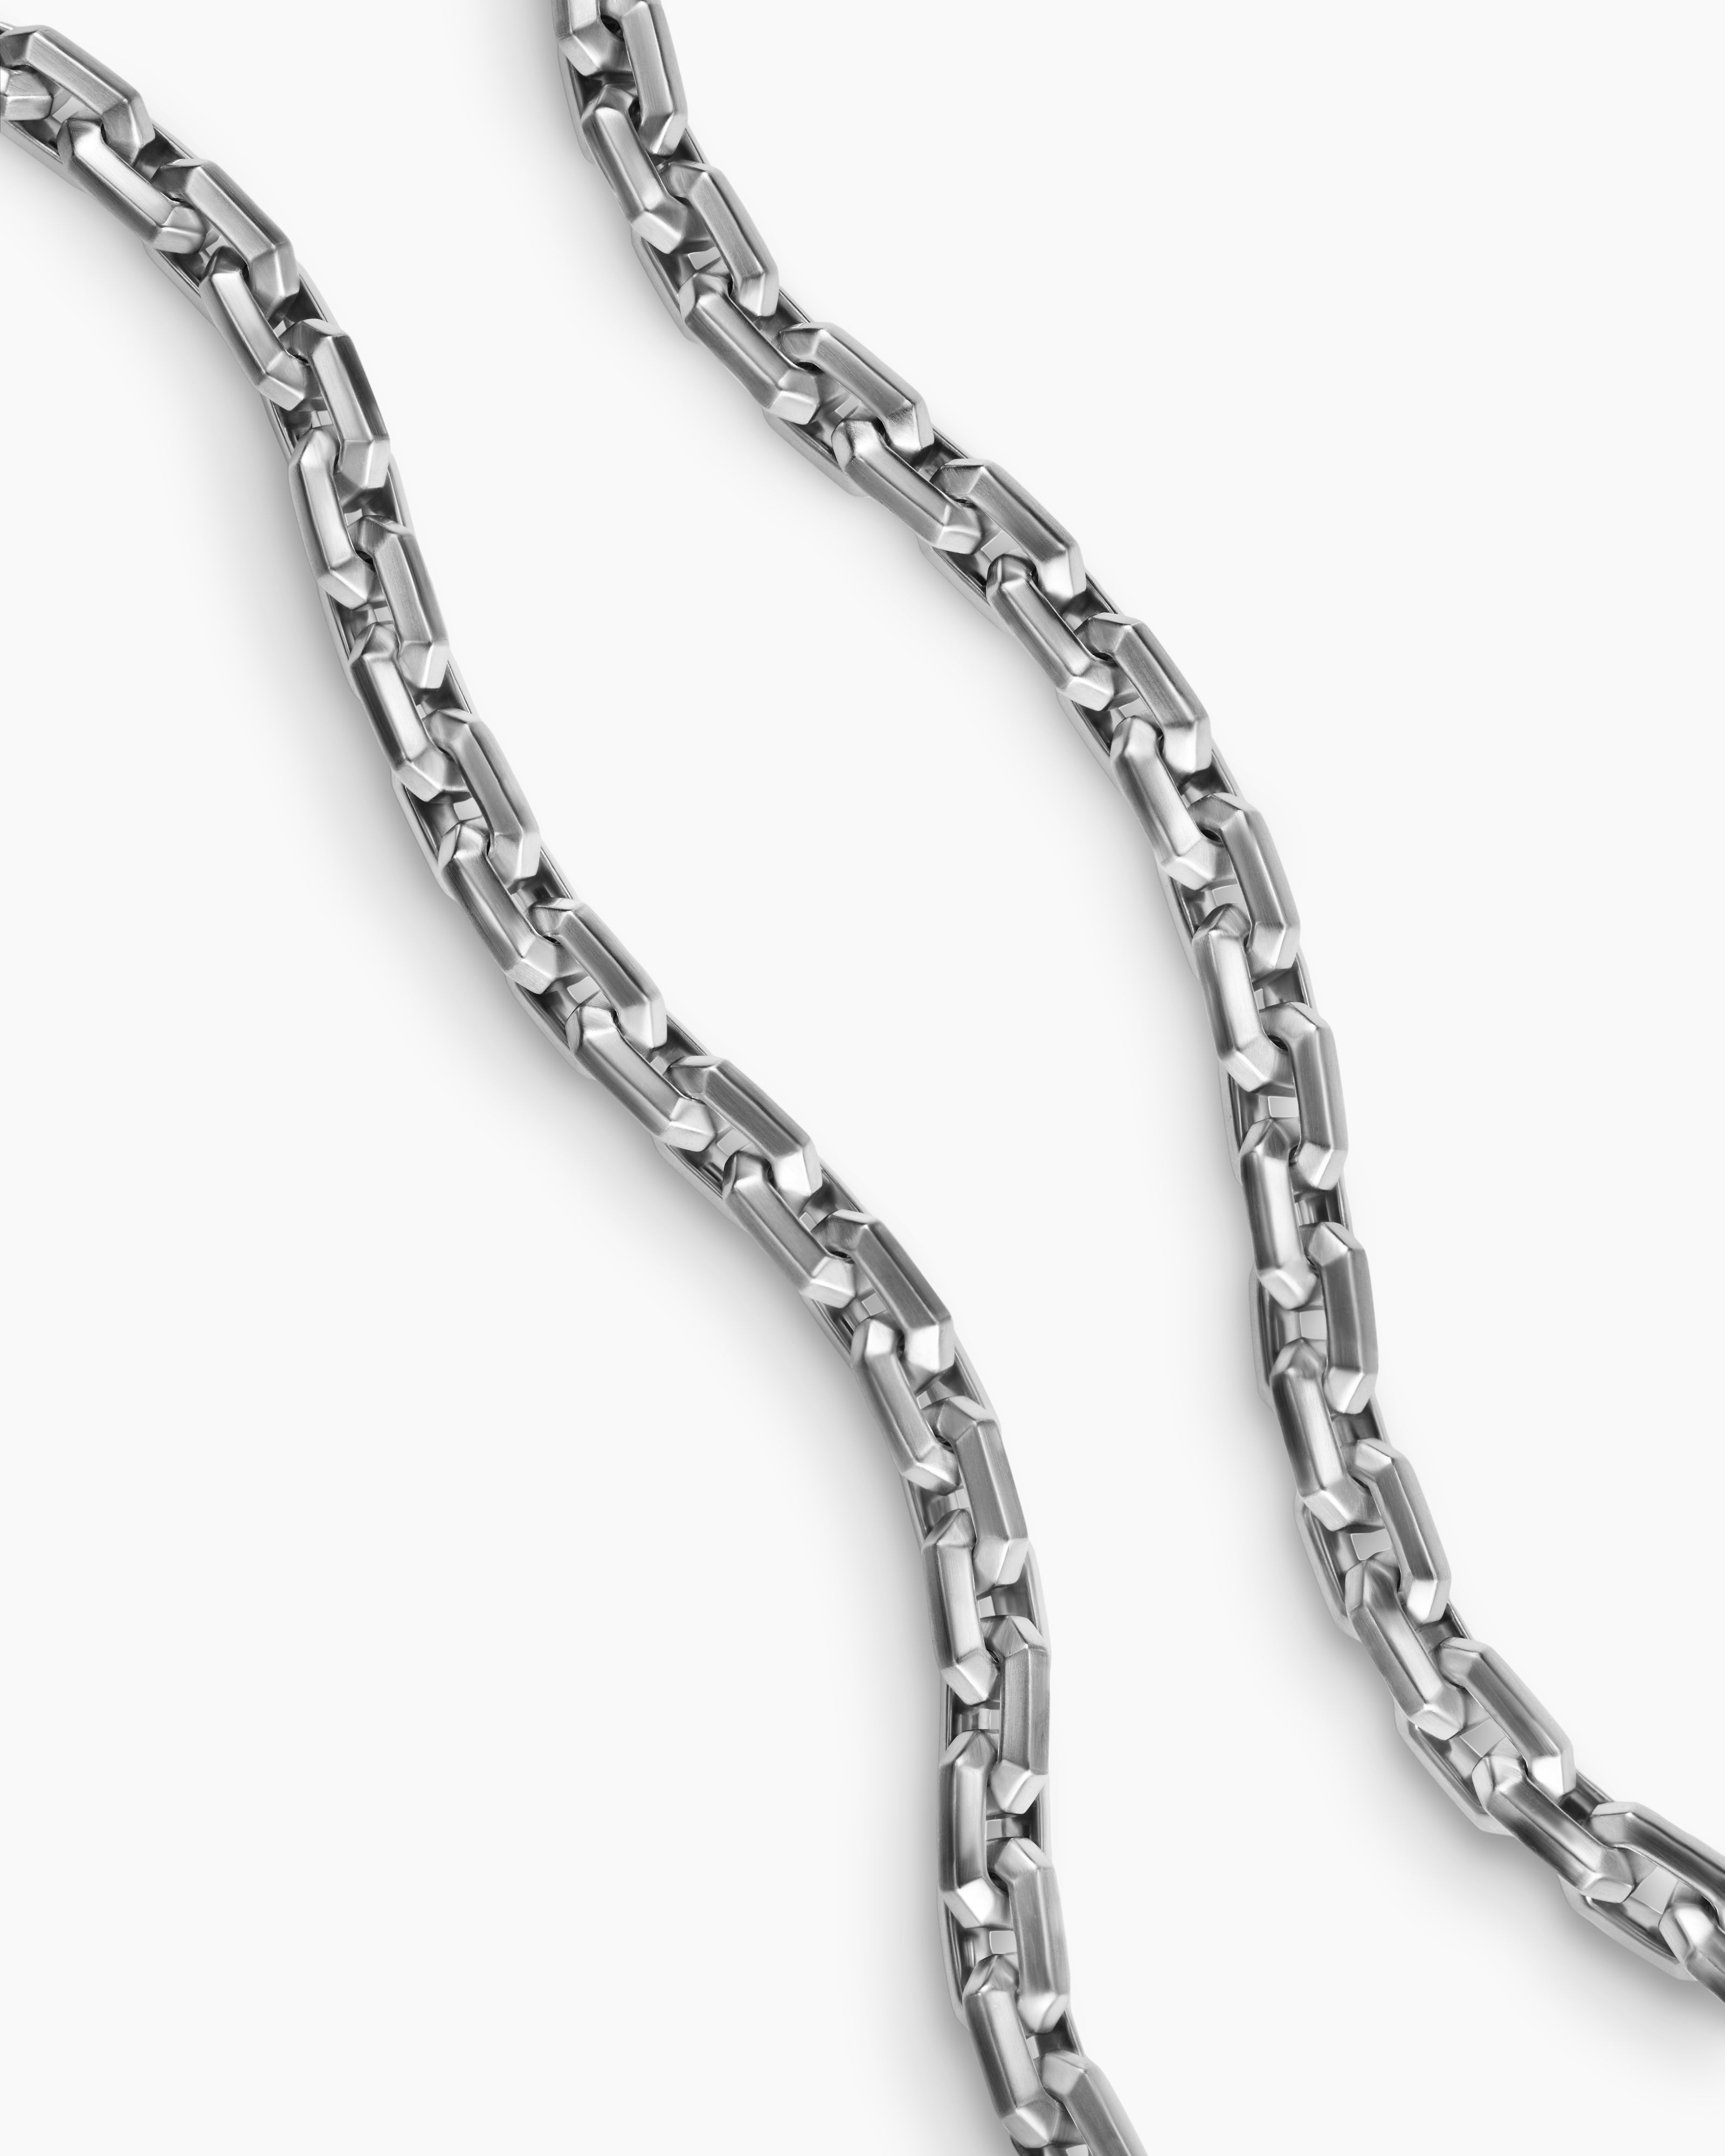 Jewels by Lux 4mm Figaro Chain Necklace - Stainless Steel Necklace Men - Stainless Steel Chain Necklace - Mens Necklace Stainless, Yellow